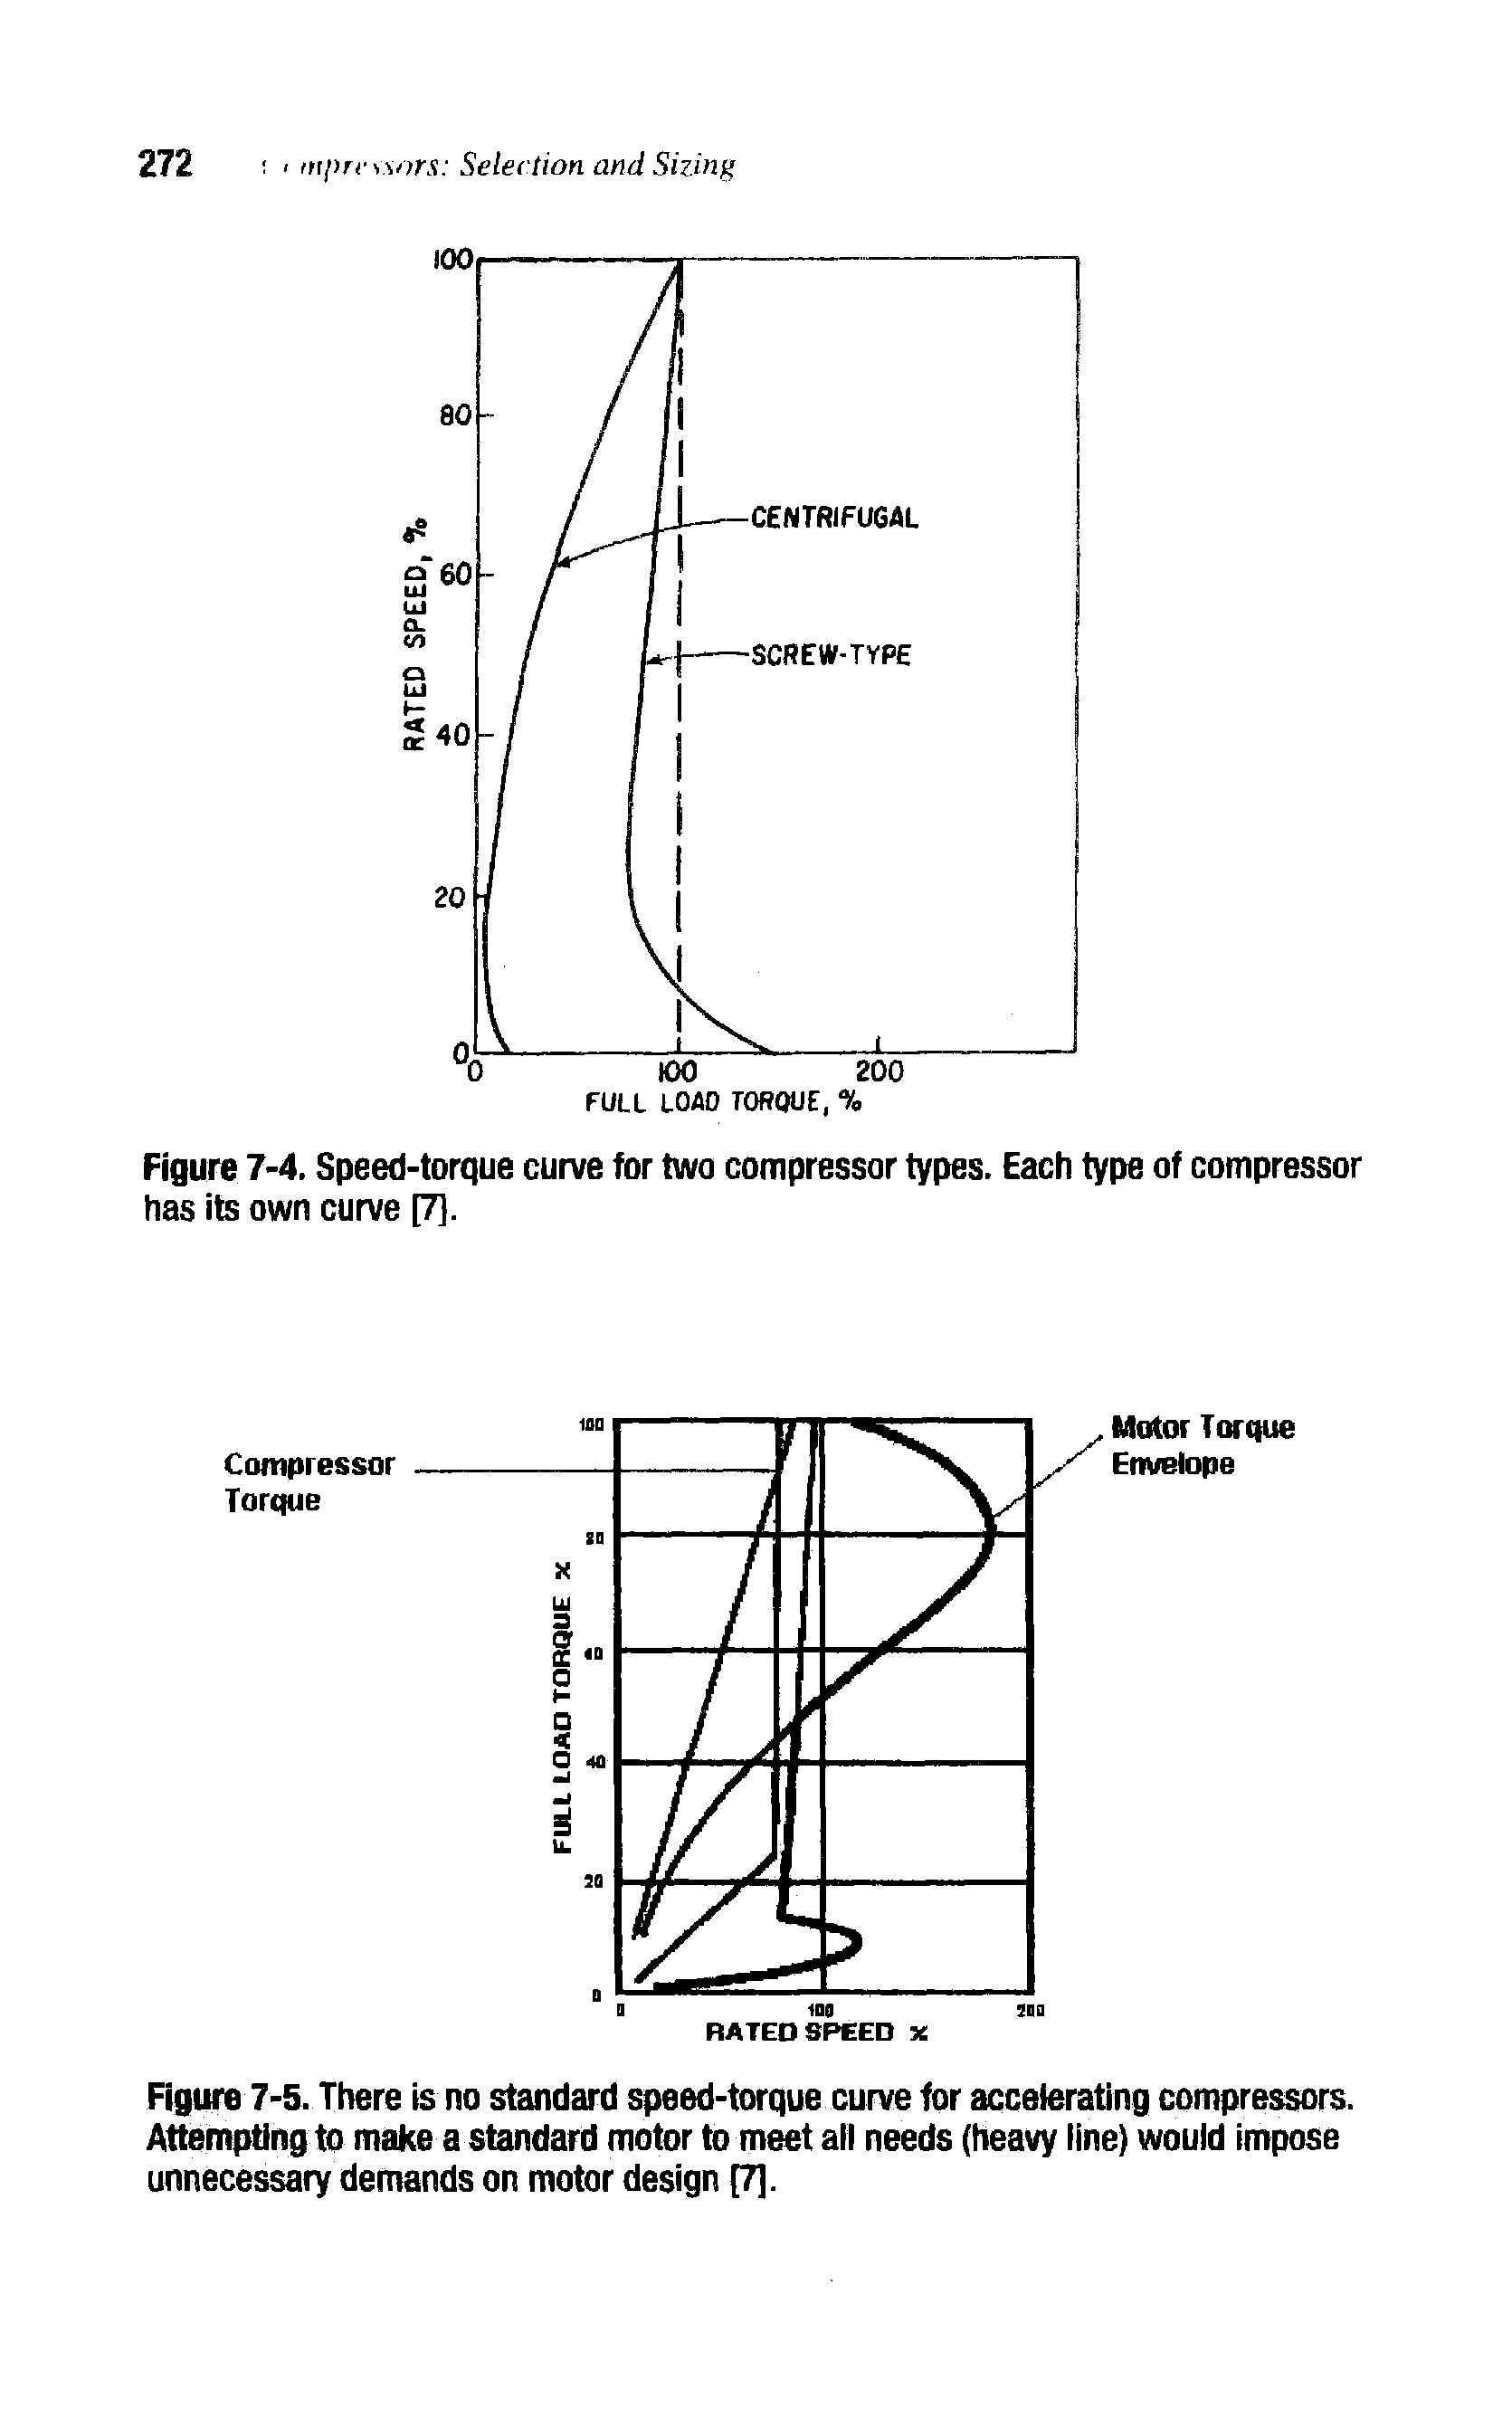 Figure 7-5. There is no standard speed-torque curve for accelerating compressors. Attempting to make a standard motor to meet all needs (heavy line) would impose unnecessary demands on motor design [7].